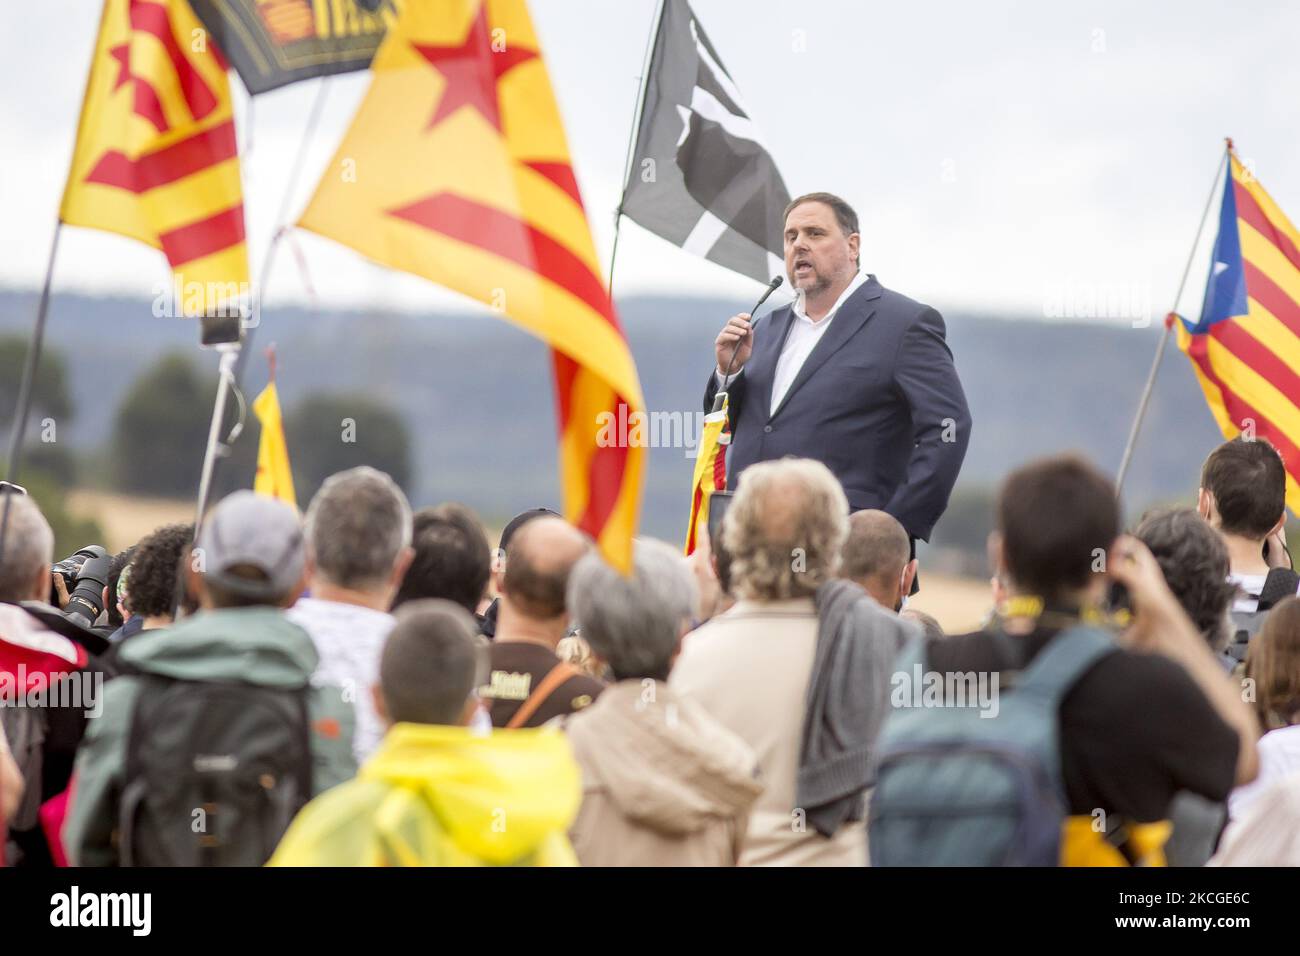 Catalan leader Oriol Junqueras in front of the Lledoners prison after the Spanish government announced a pardon for those who participated in Catalonia's failed 2017 independence bid, Sant Joan de Vilatorrada, near Barcelona, Catalonia, Spain on June 23, 2021 (Photo by Albert Llop/NurPhoto) Stock Photo